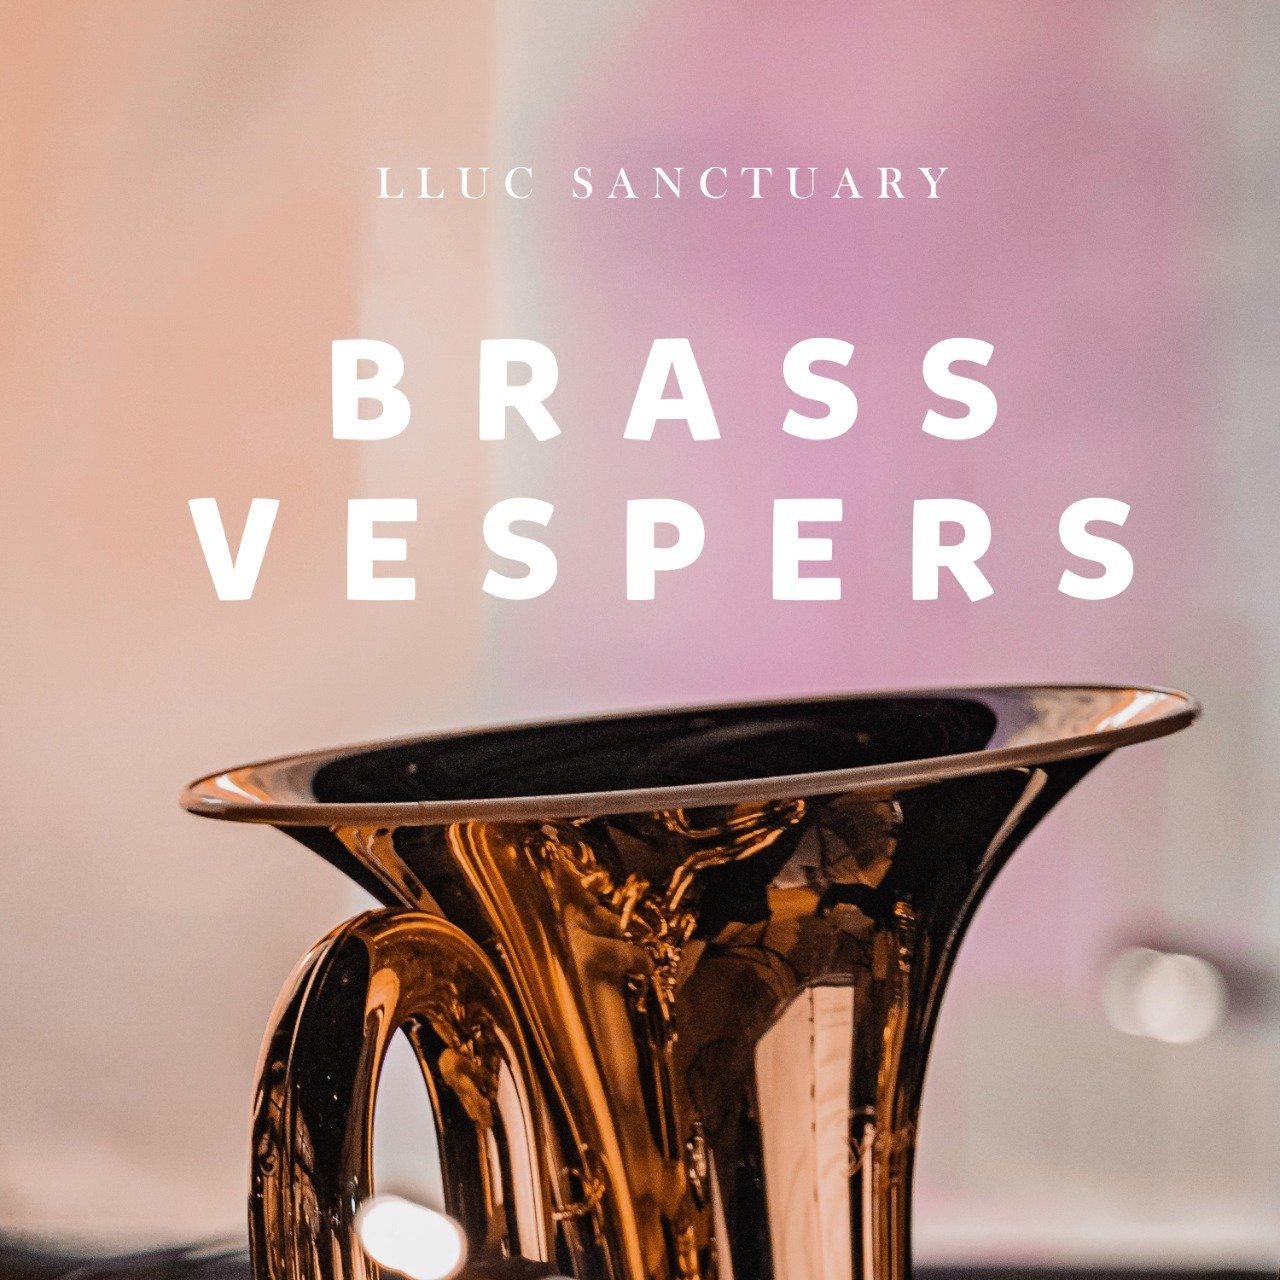 The weekend is here and we're looking forward to spending it with you! We wrap up the Tangled series tomorrow and then in the afternoon the LLUC Sanctuary Brass will present Vespers at 5pm in the Sanctuary. Make plans to join us!